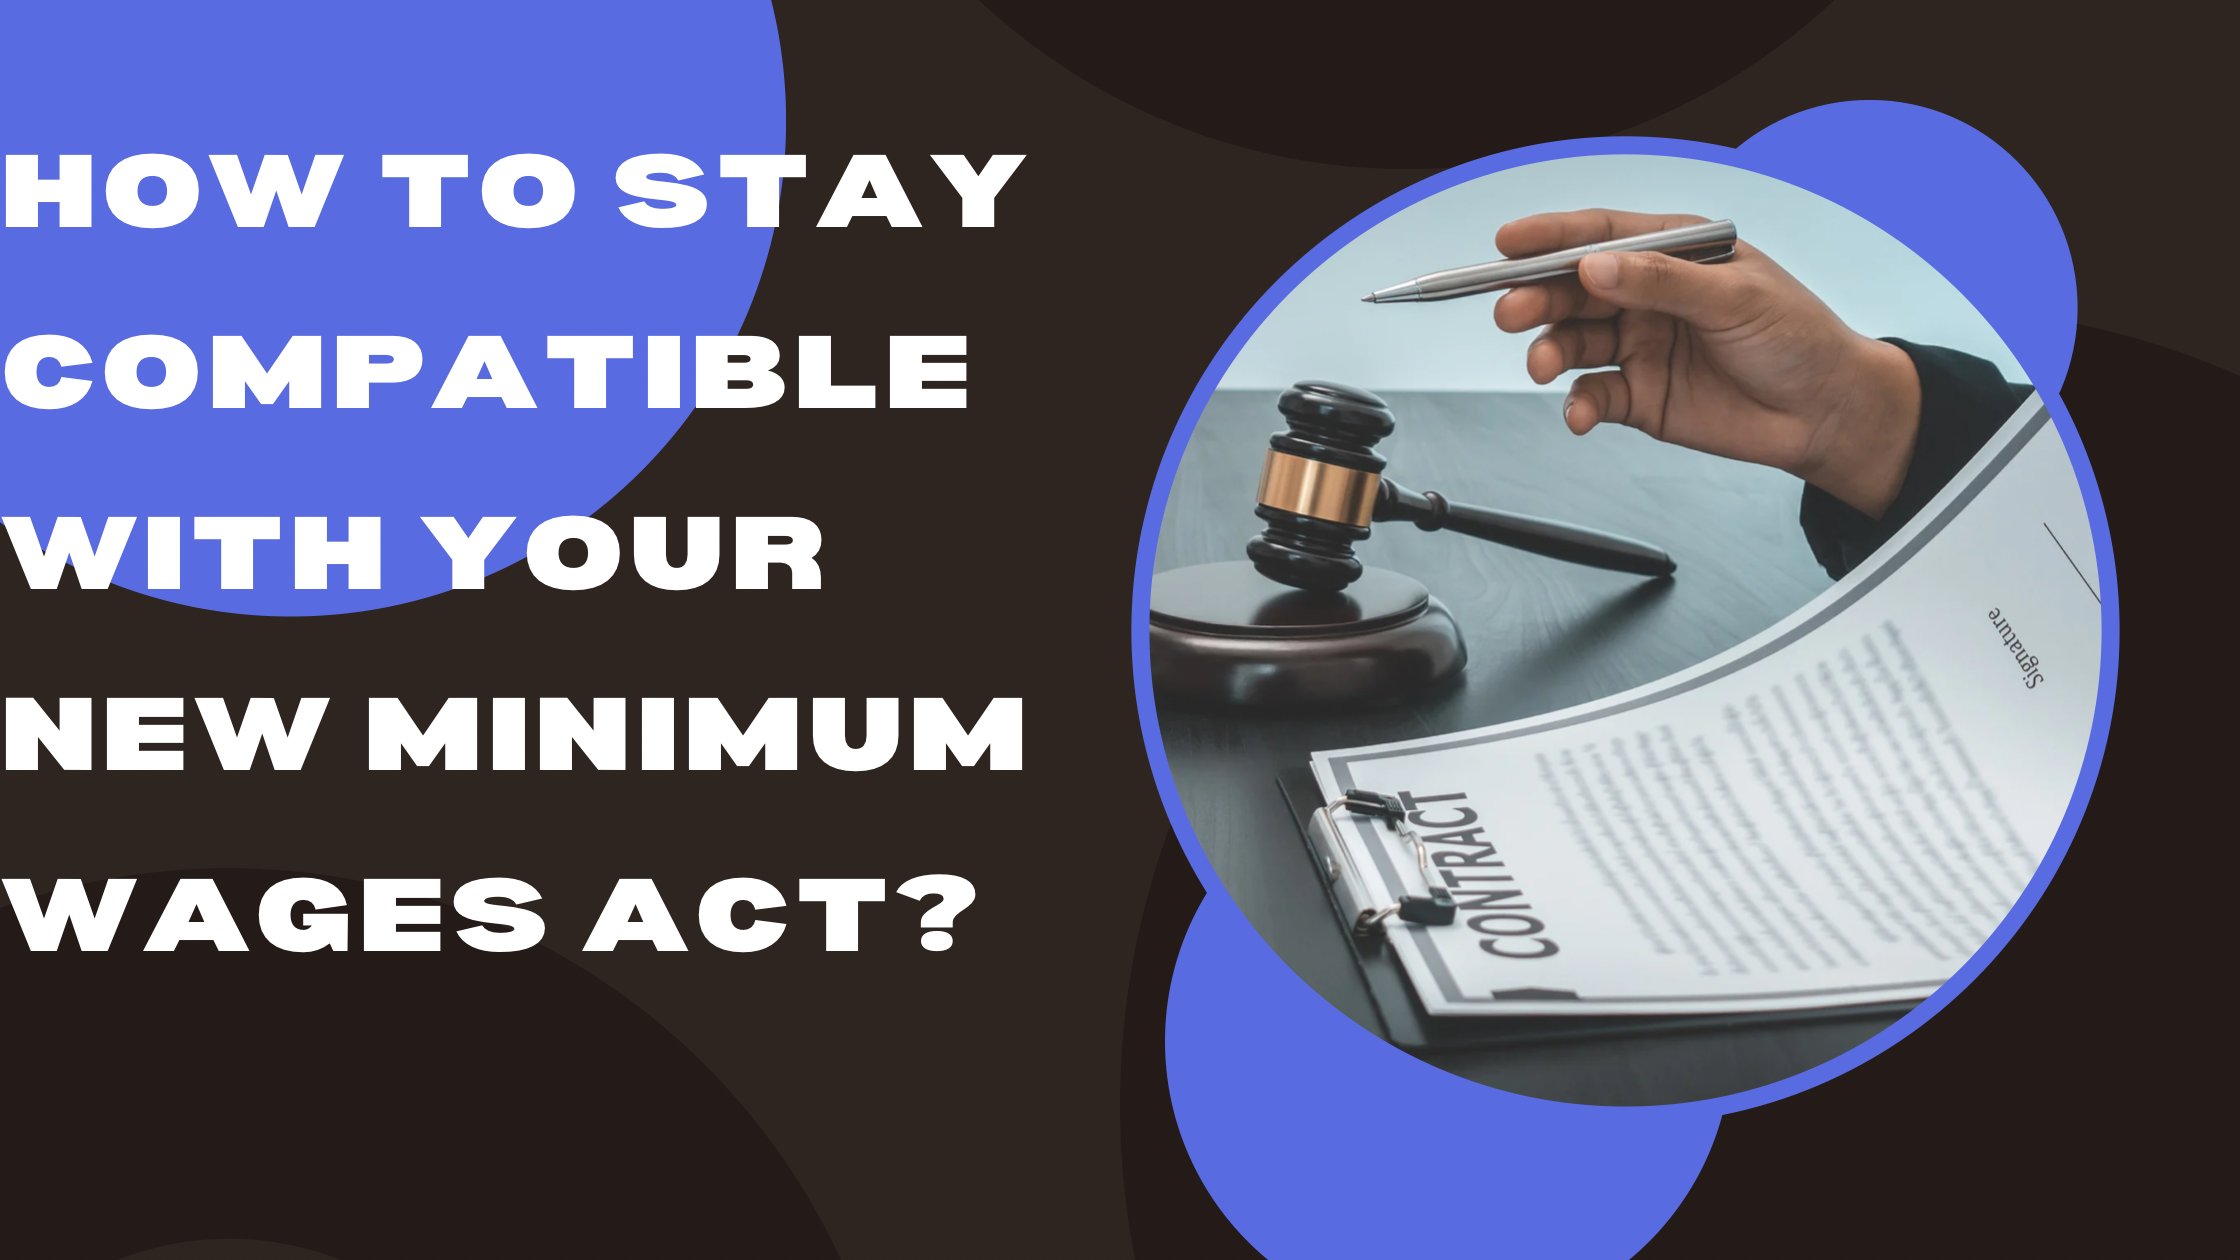 How To Stay Compatible With Your New Minimum Wages Act? 